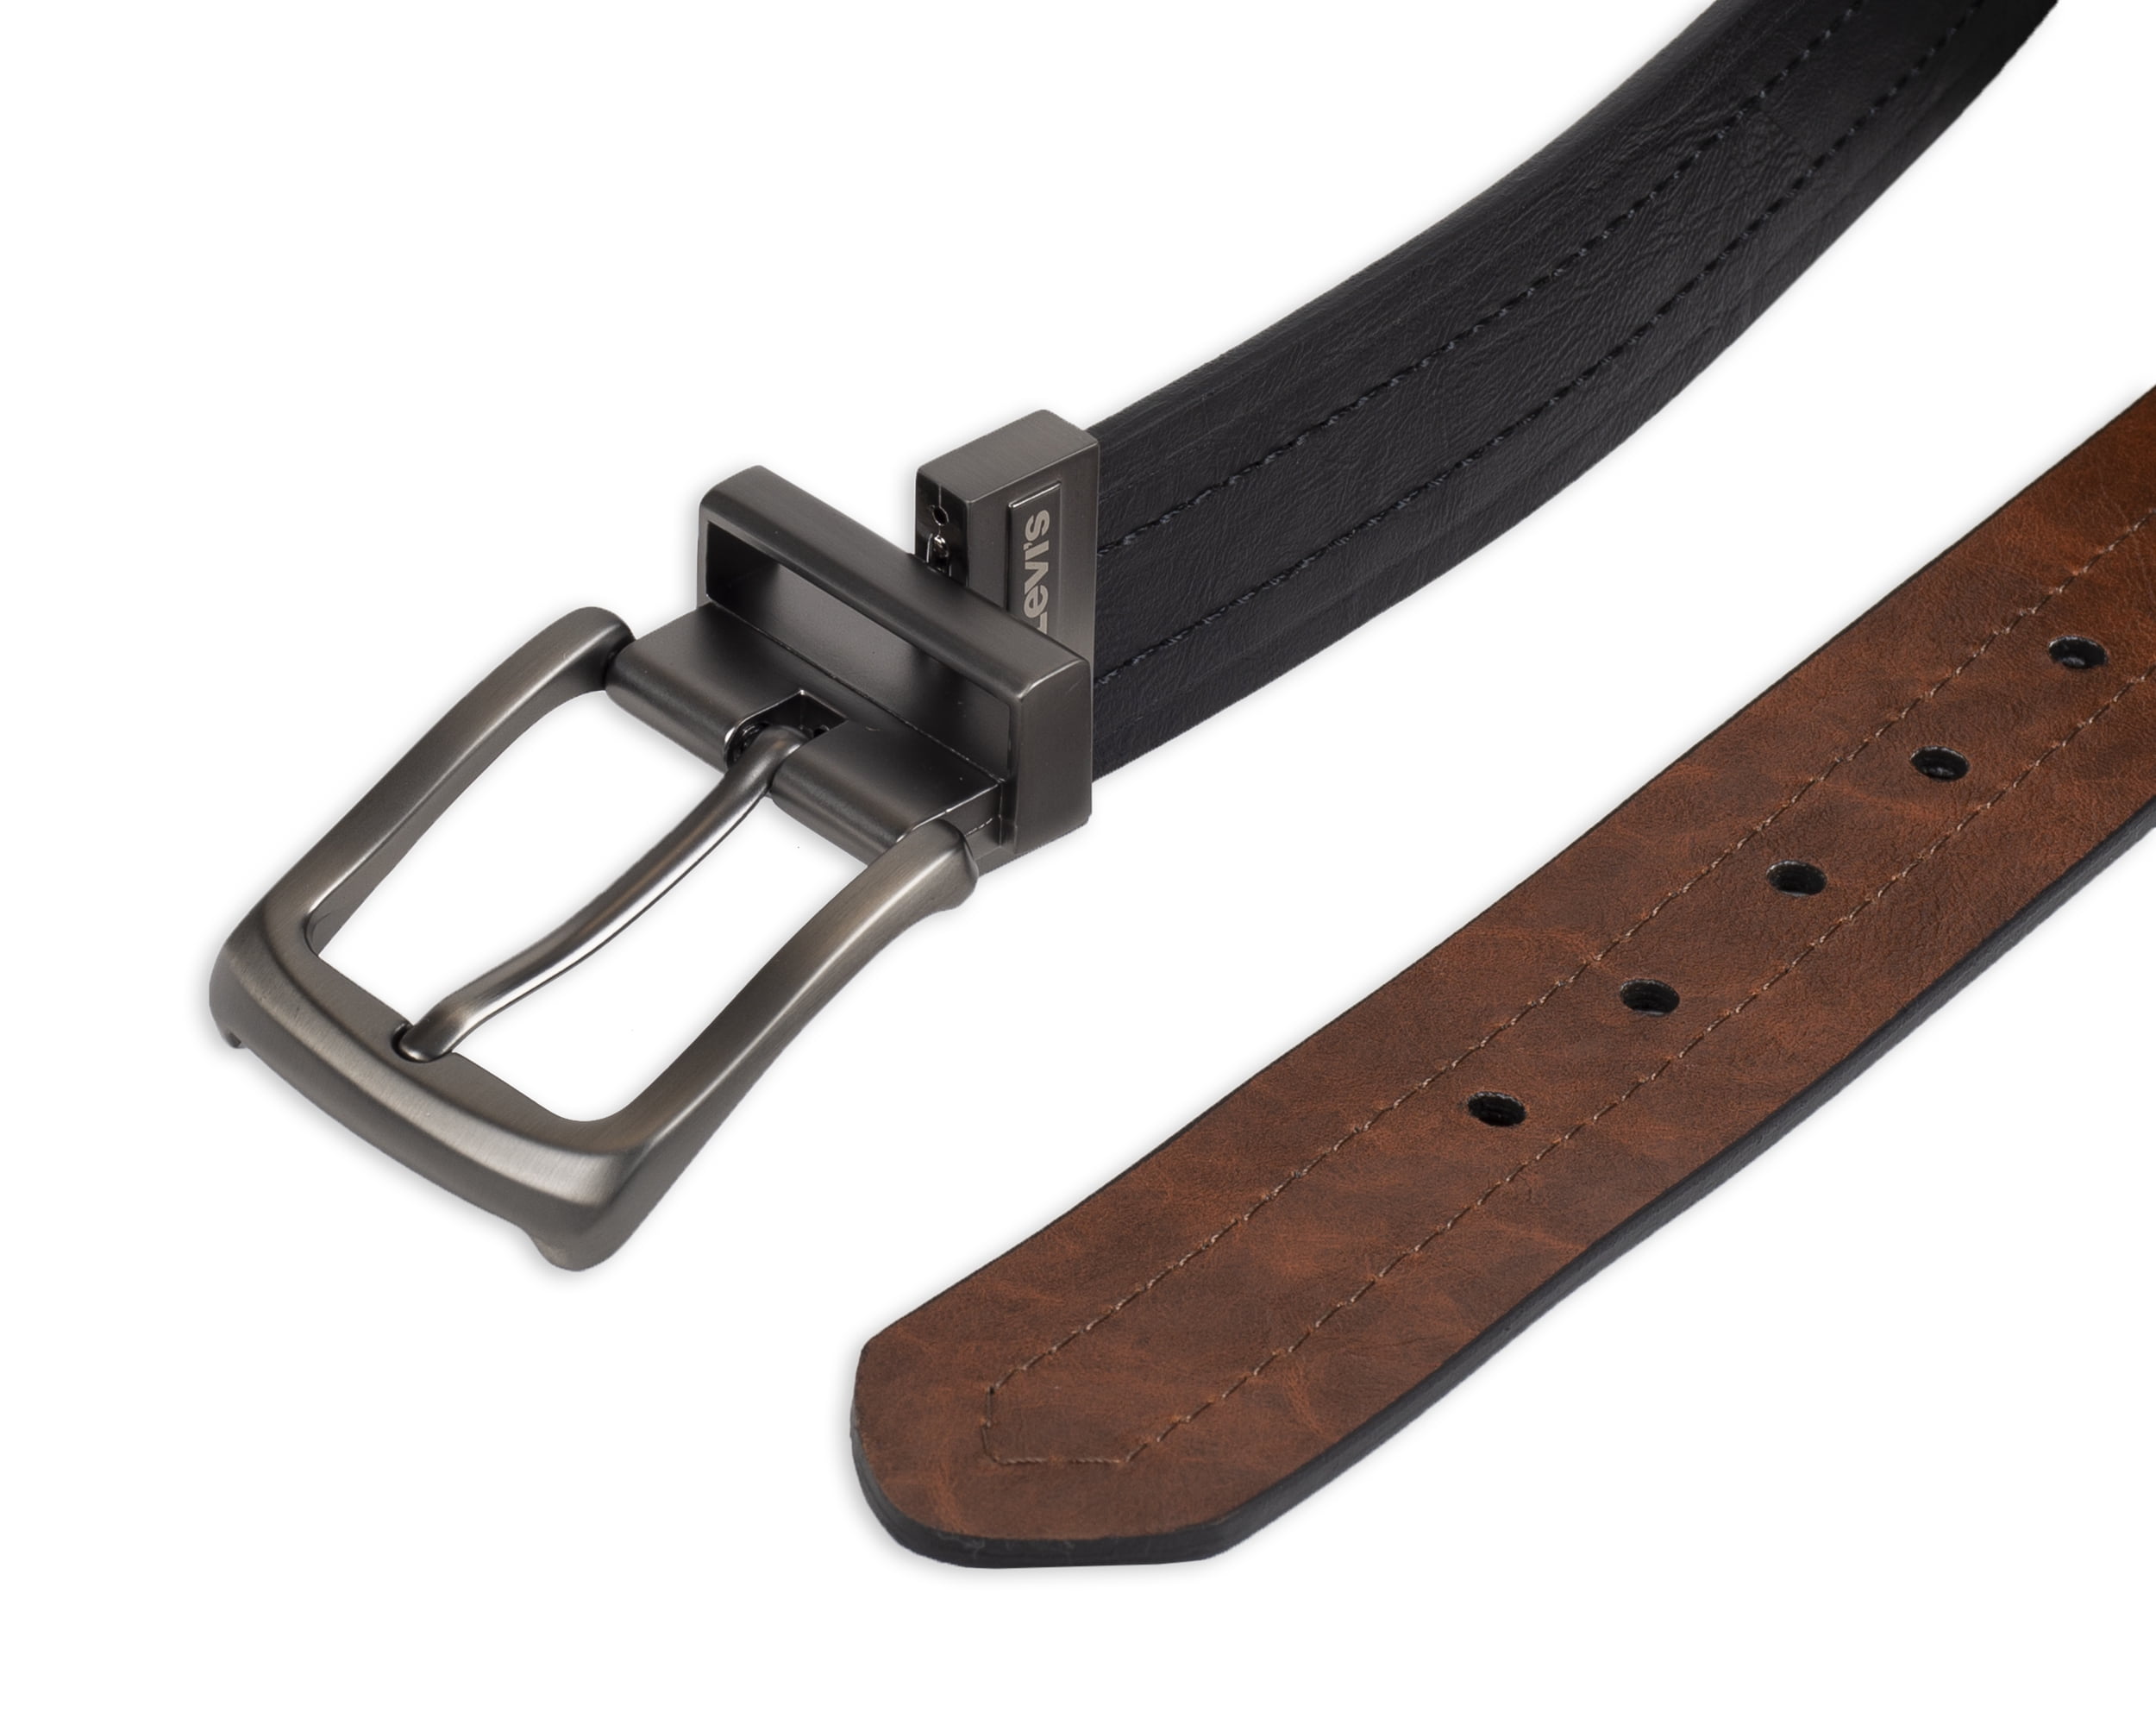 Levi's Men's Two-in-One Reversible Casual Belt, Brown/Black